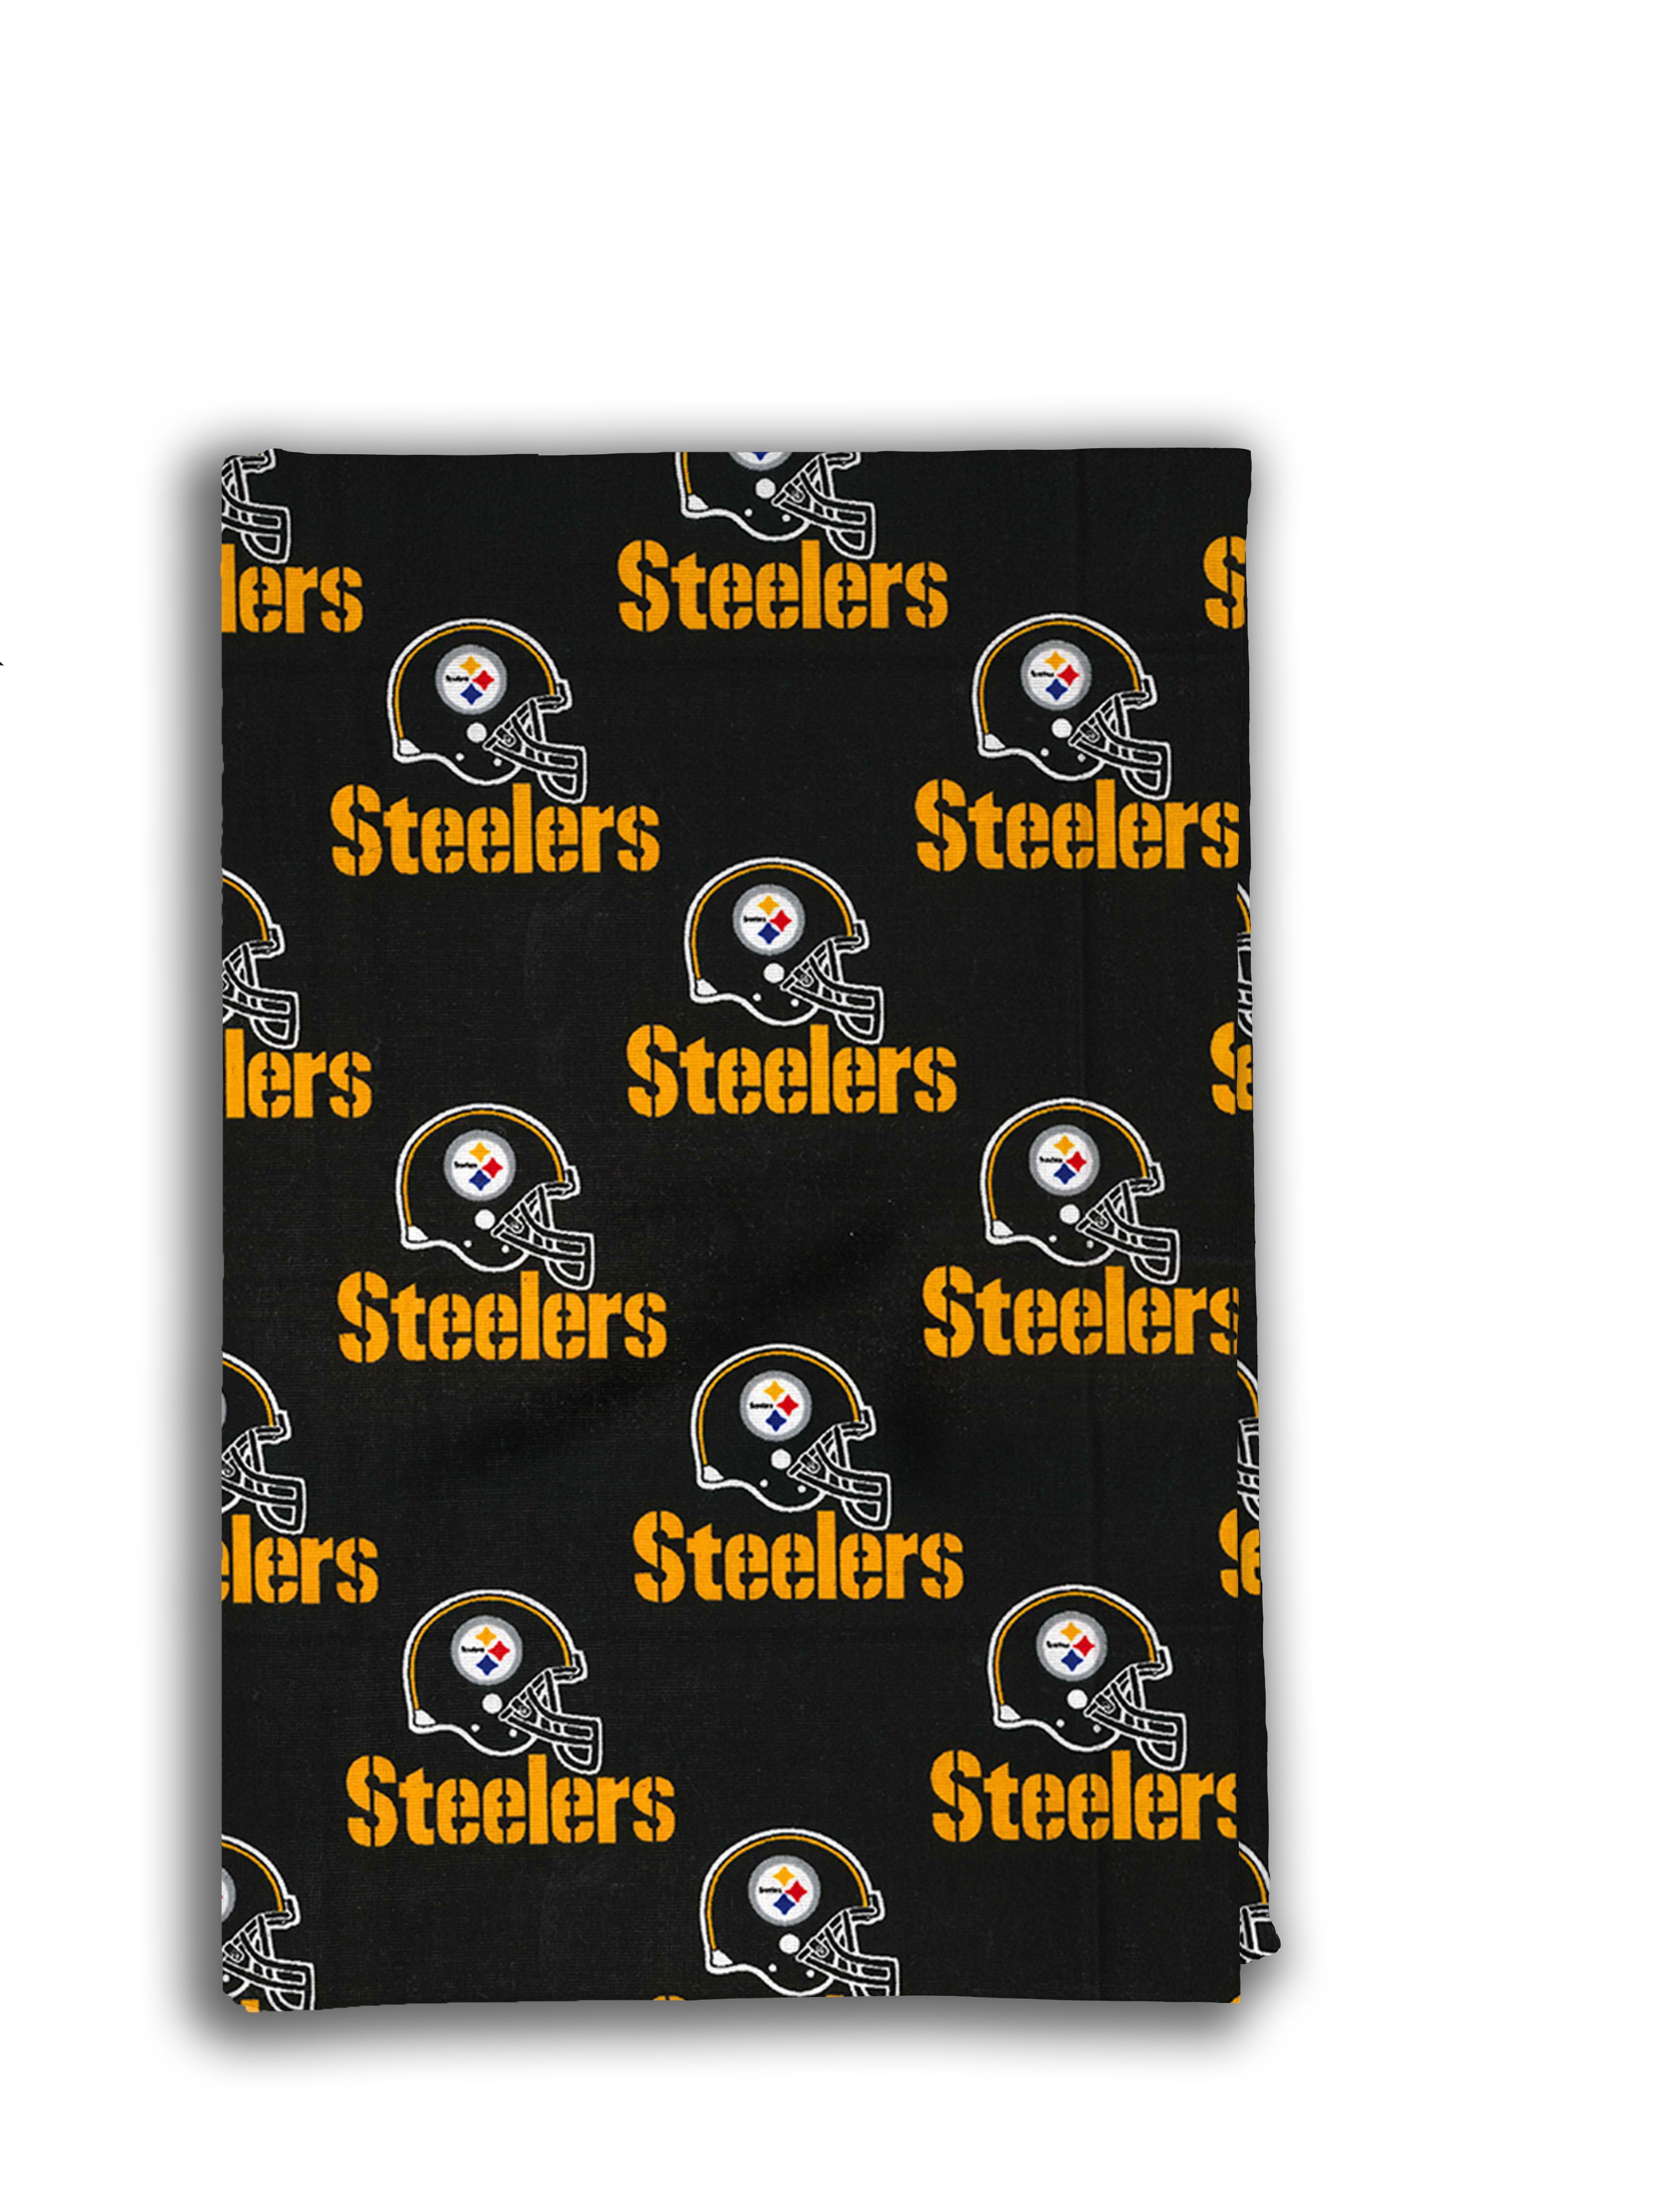 Pittsburgh Steelers Cotton Fabric Black Background 14 Yard 9 x 54 Perfect for Face Masks